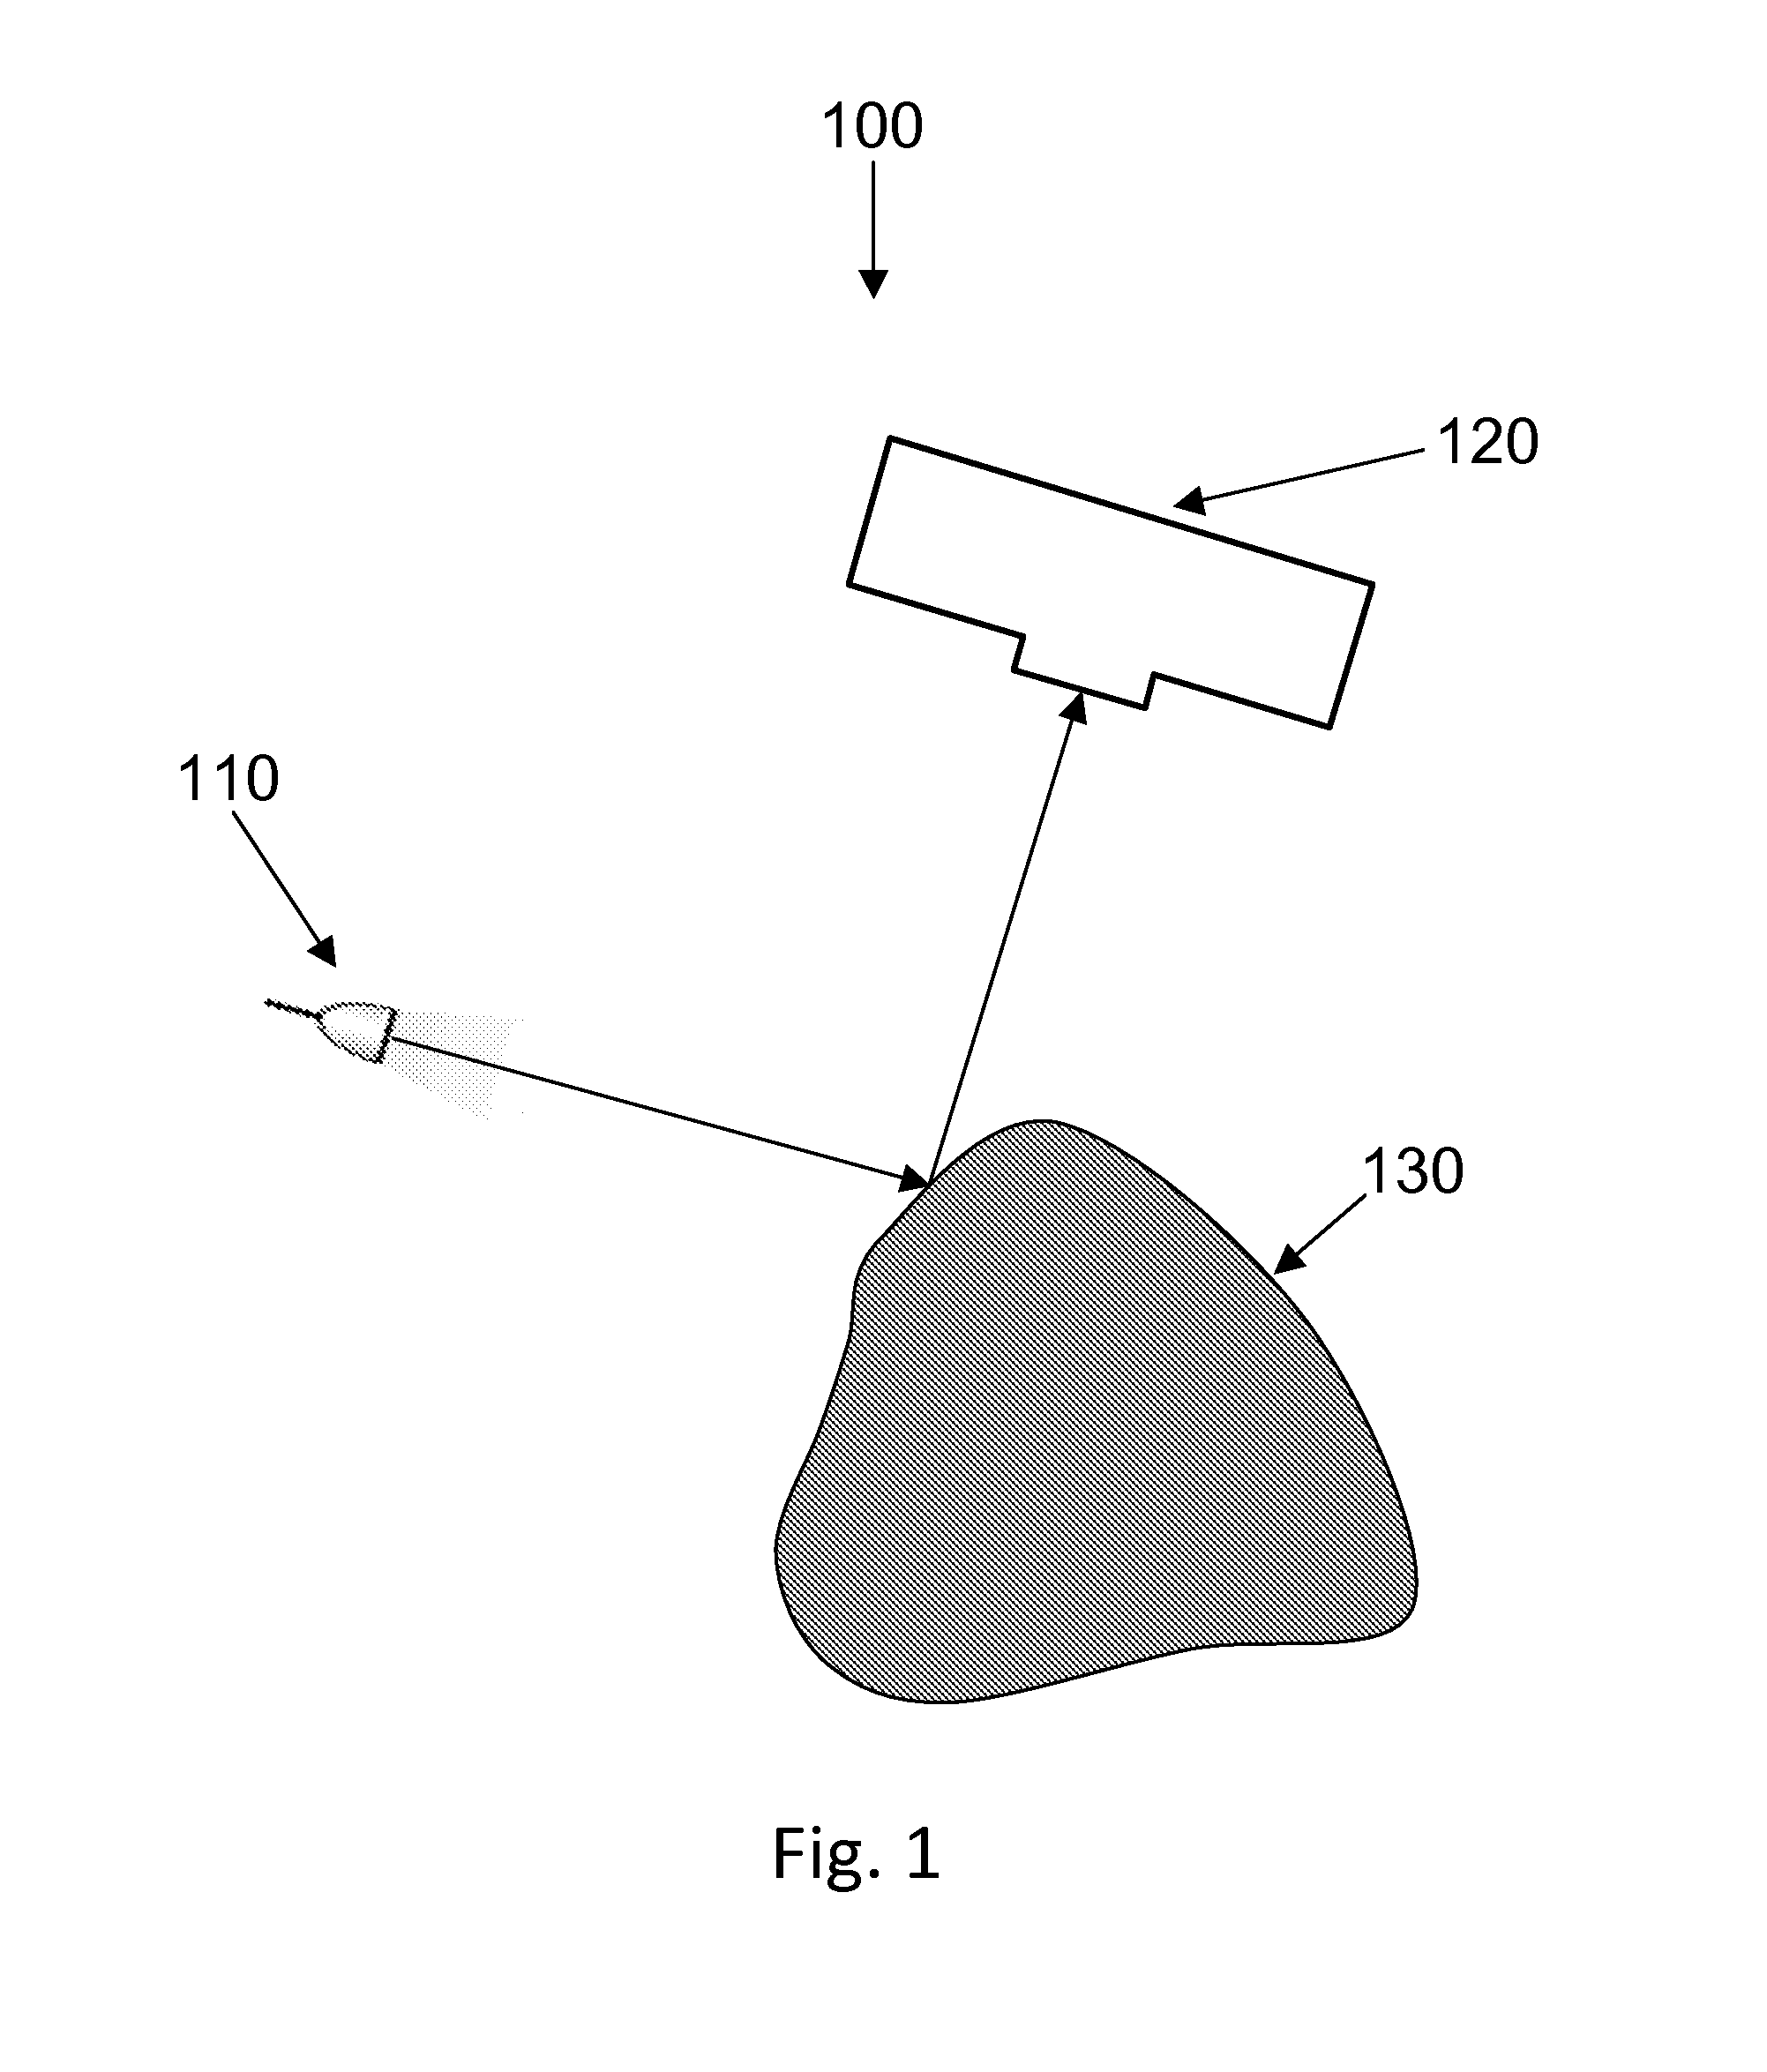 Device and method for assisting laparoscopic surgery - directing and maneuvering articulating tool